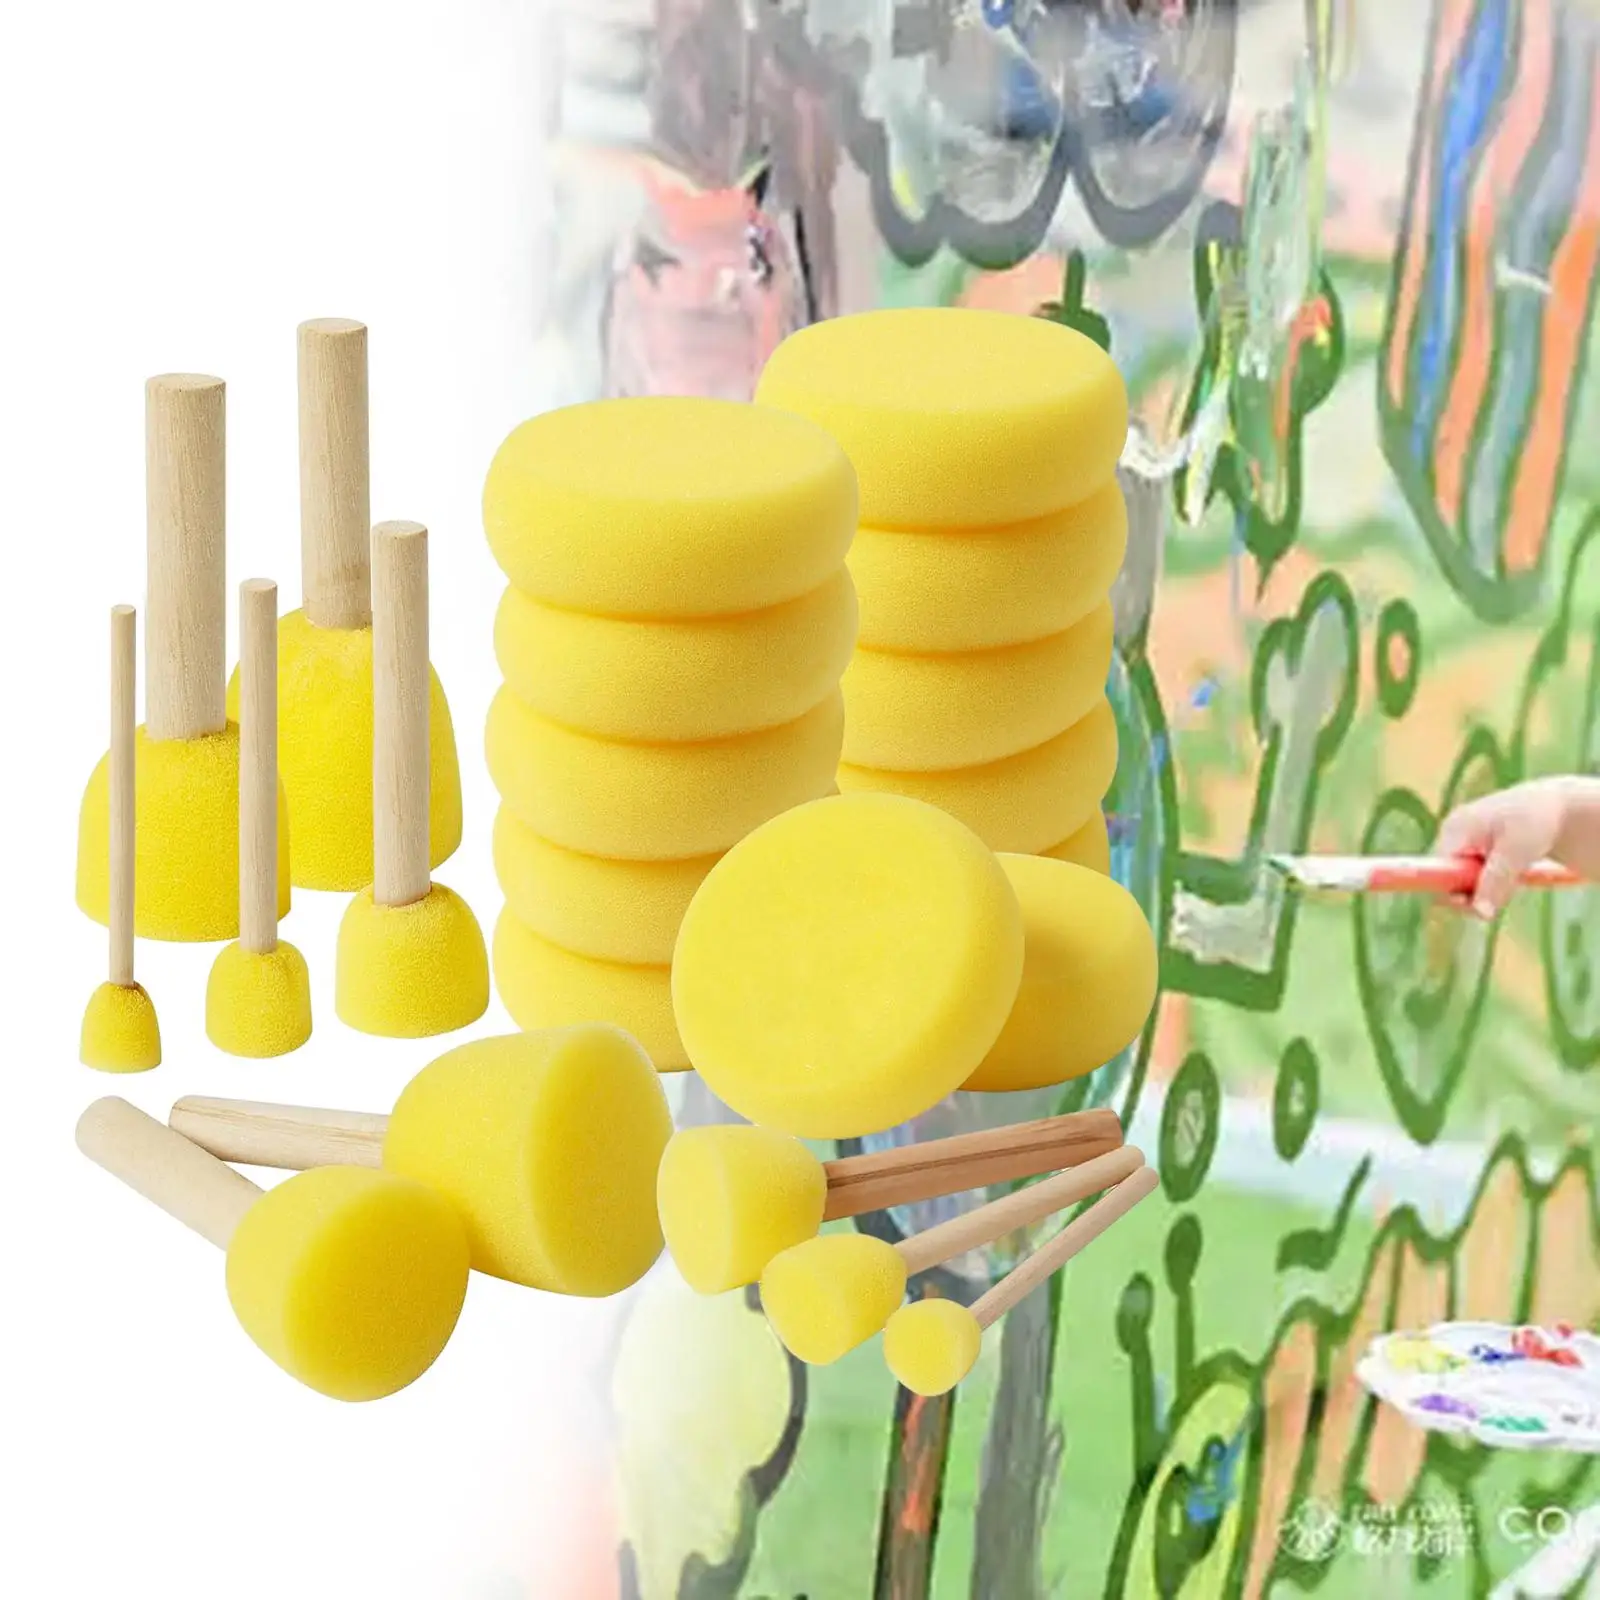 22x Sponge Stamp Toy Boys and Girls Drawing Brush Foam Painting Brushes Kids Painting Supply Wooden Handle Paint Sponges